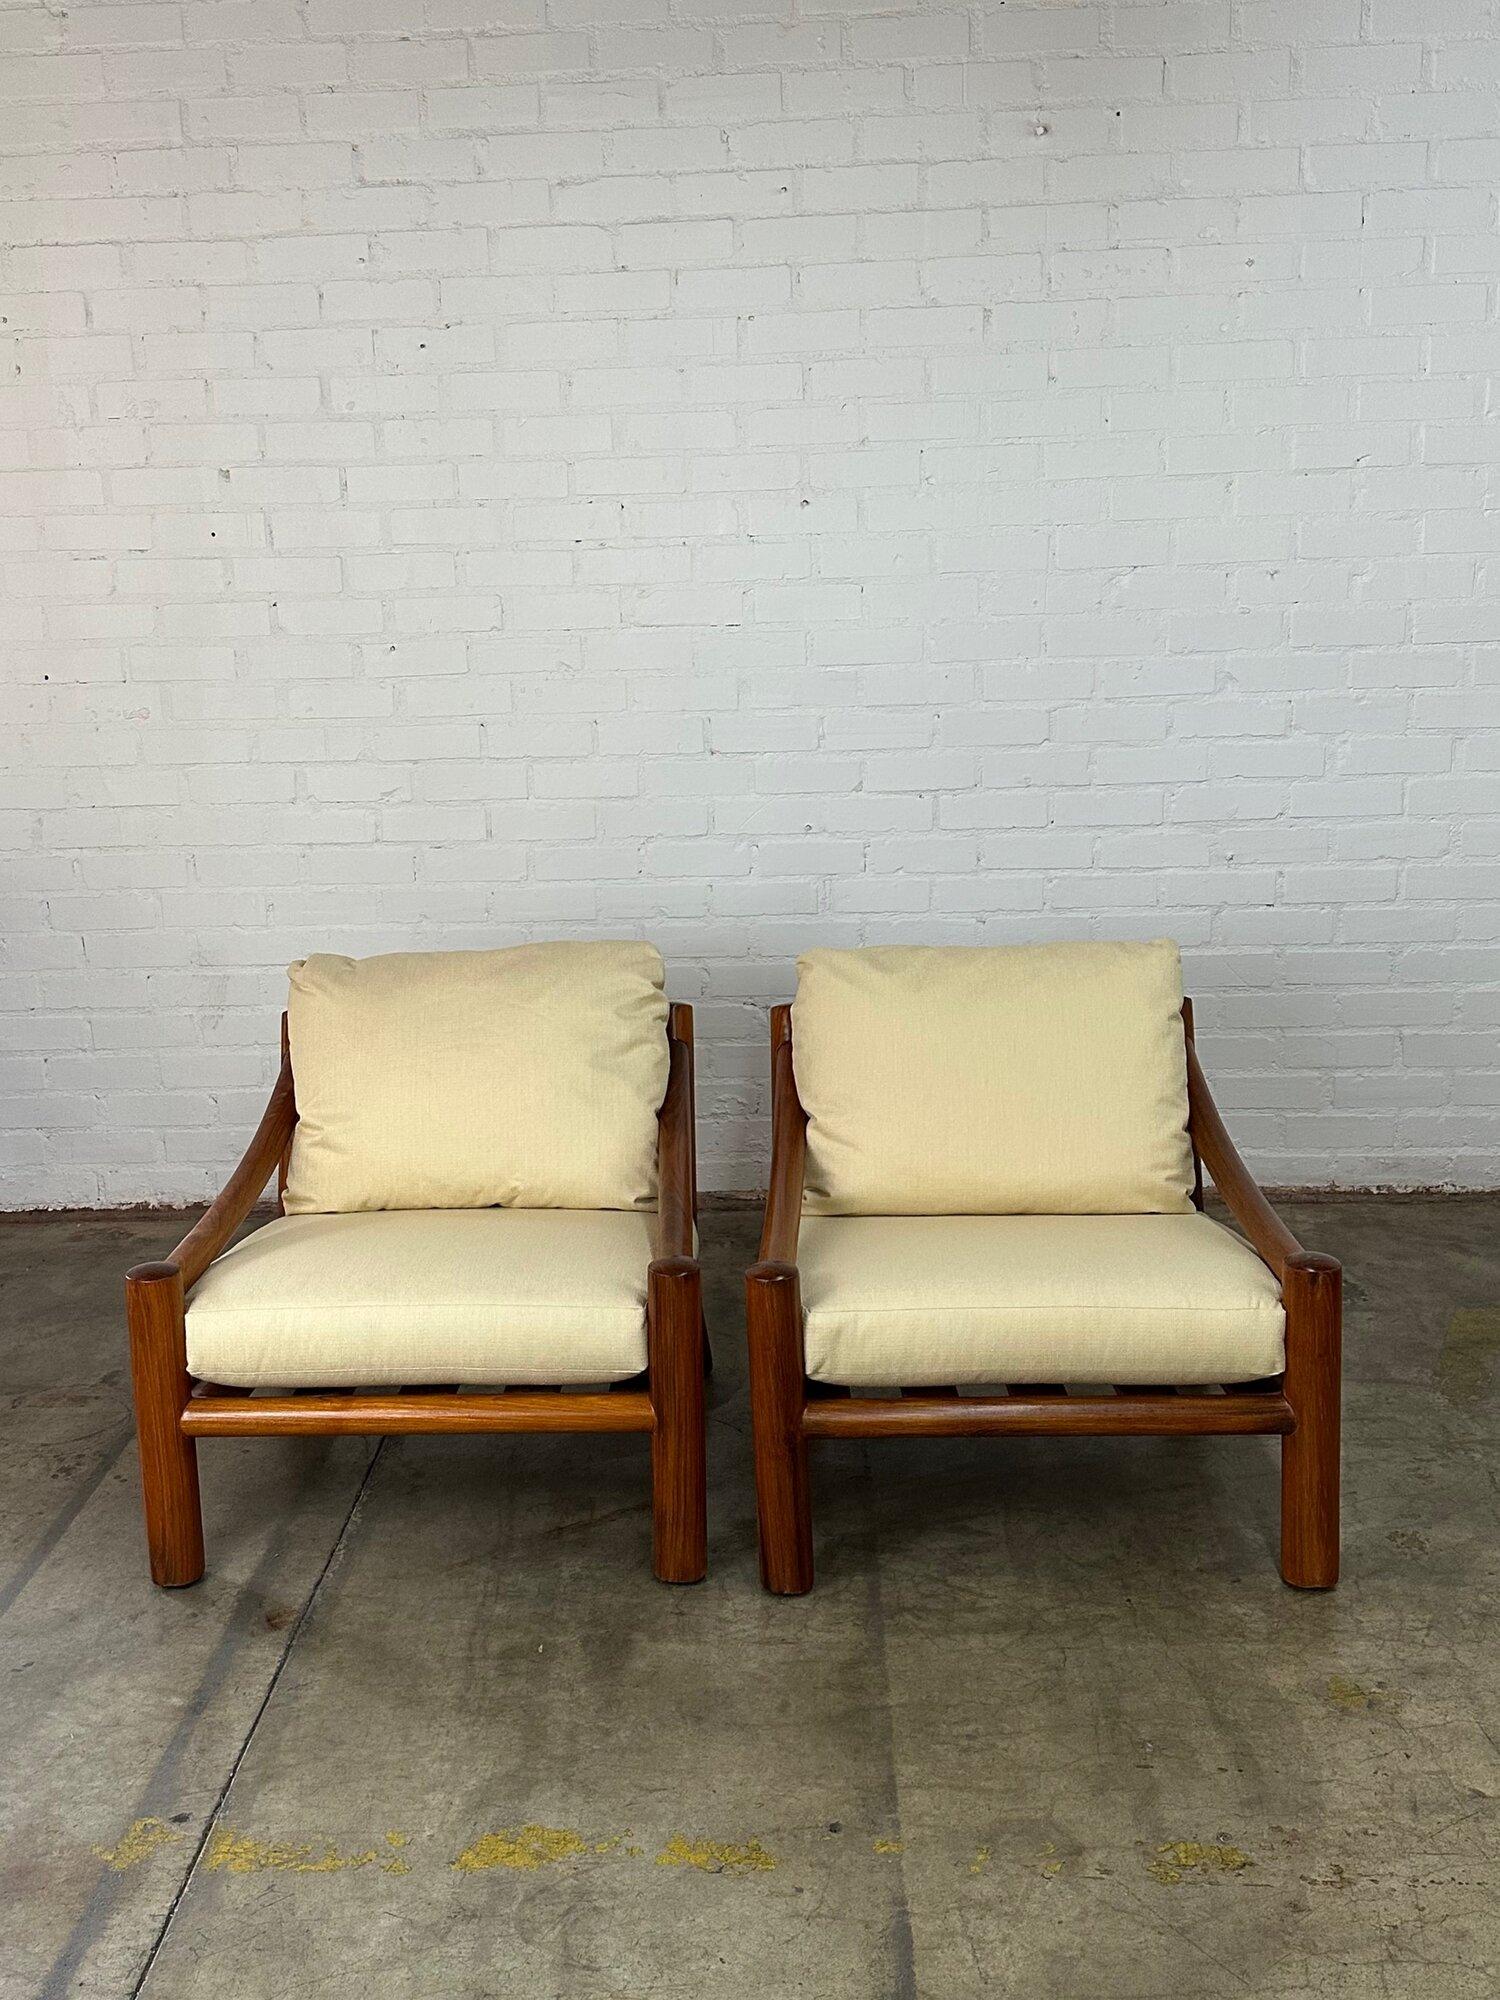 W36 D38 H30 SW29 SD21 SH18 AH20.

Fully restored solid teak outdoor lounge chairs. The pair is structurally sound and has newly refinished frames with fresh outdoor fabric. The set is part of Michael Taylor Outdoor Douglas Teak Collection. Price